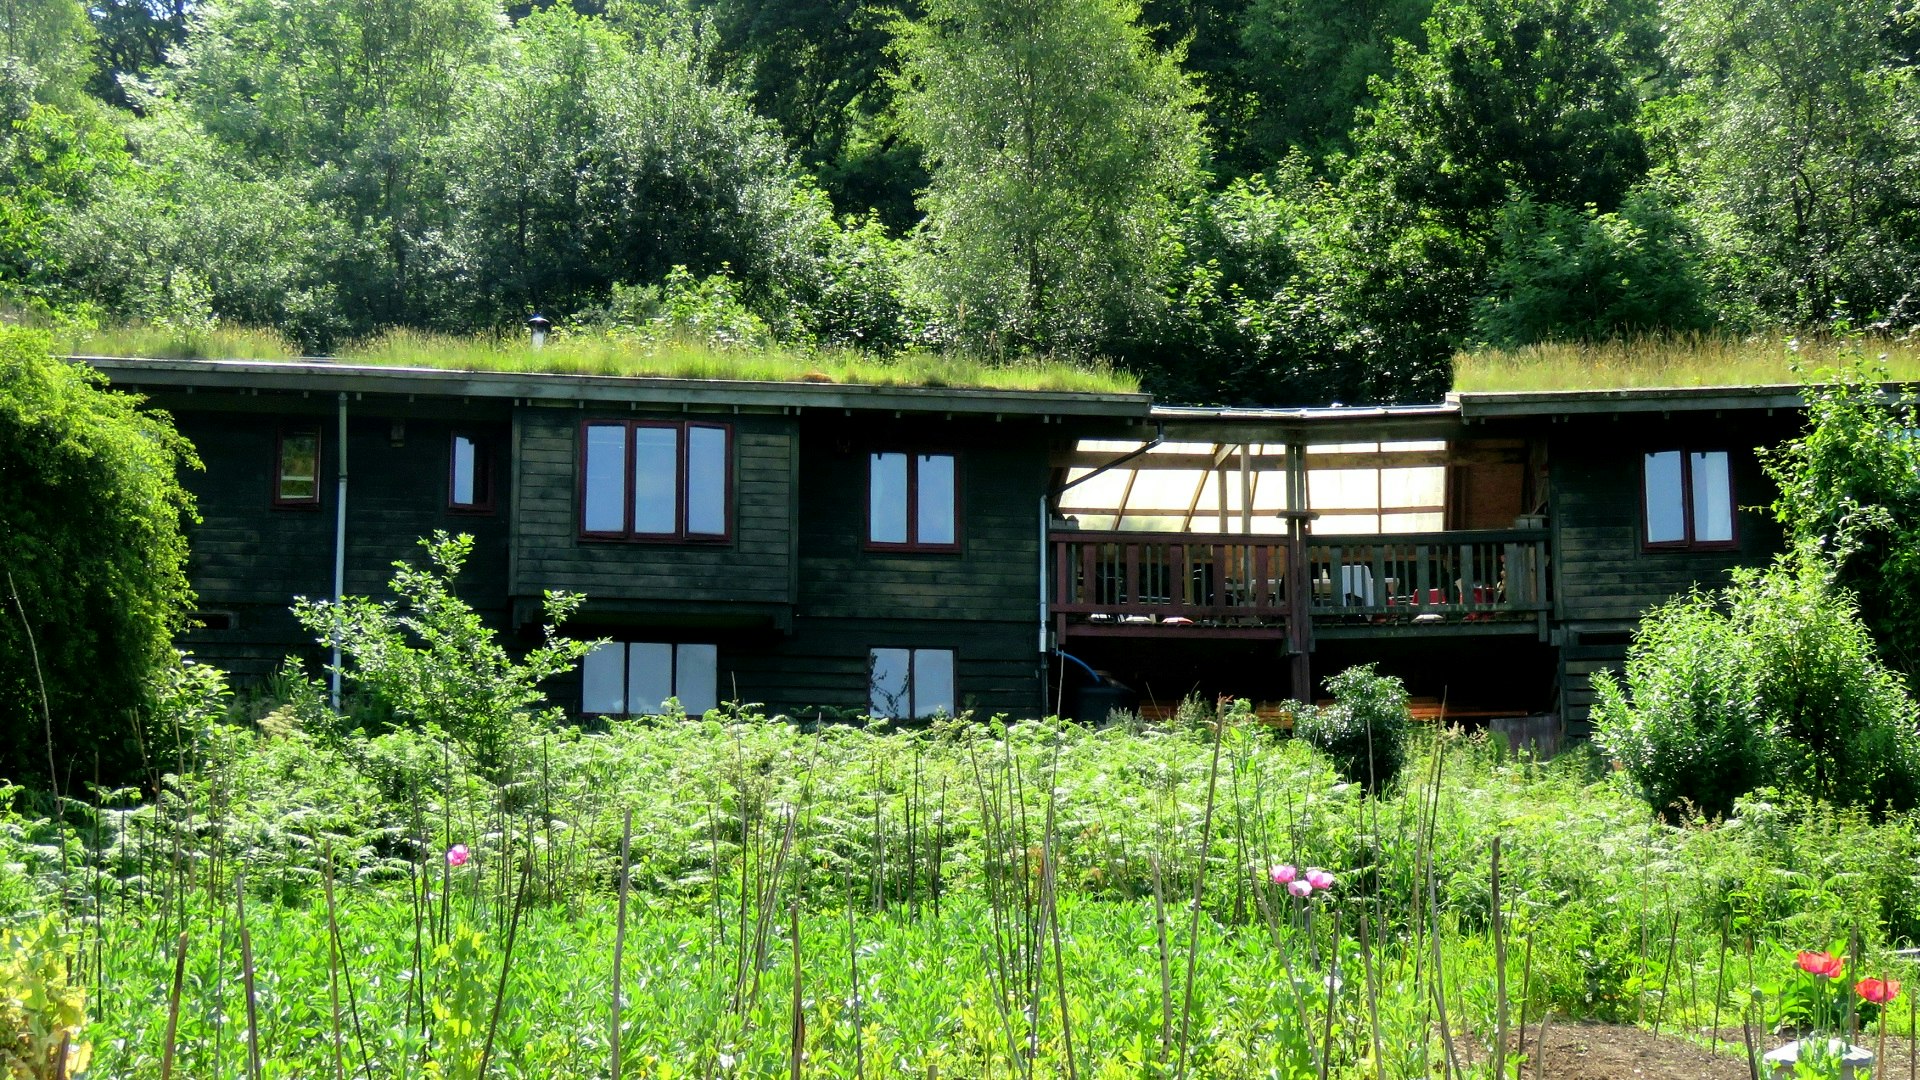 Looking across an organic garden at the Eco Cabins